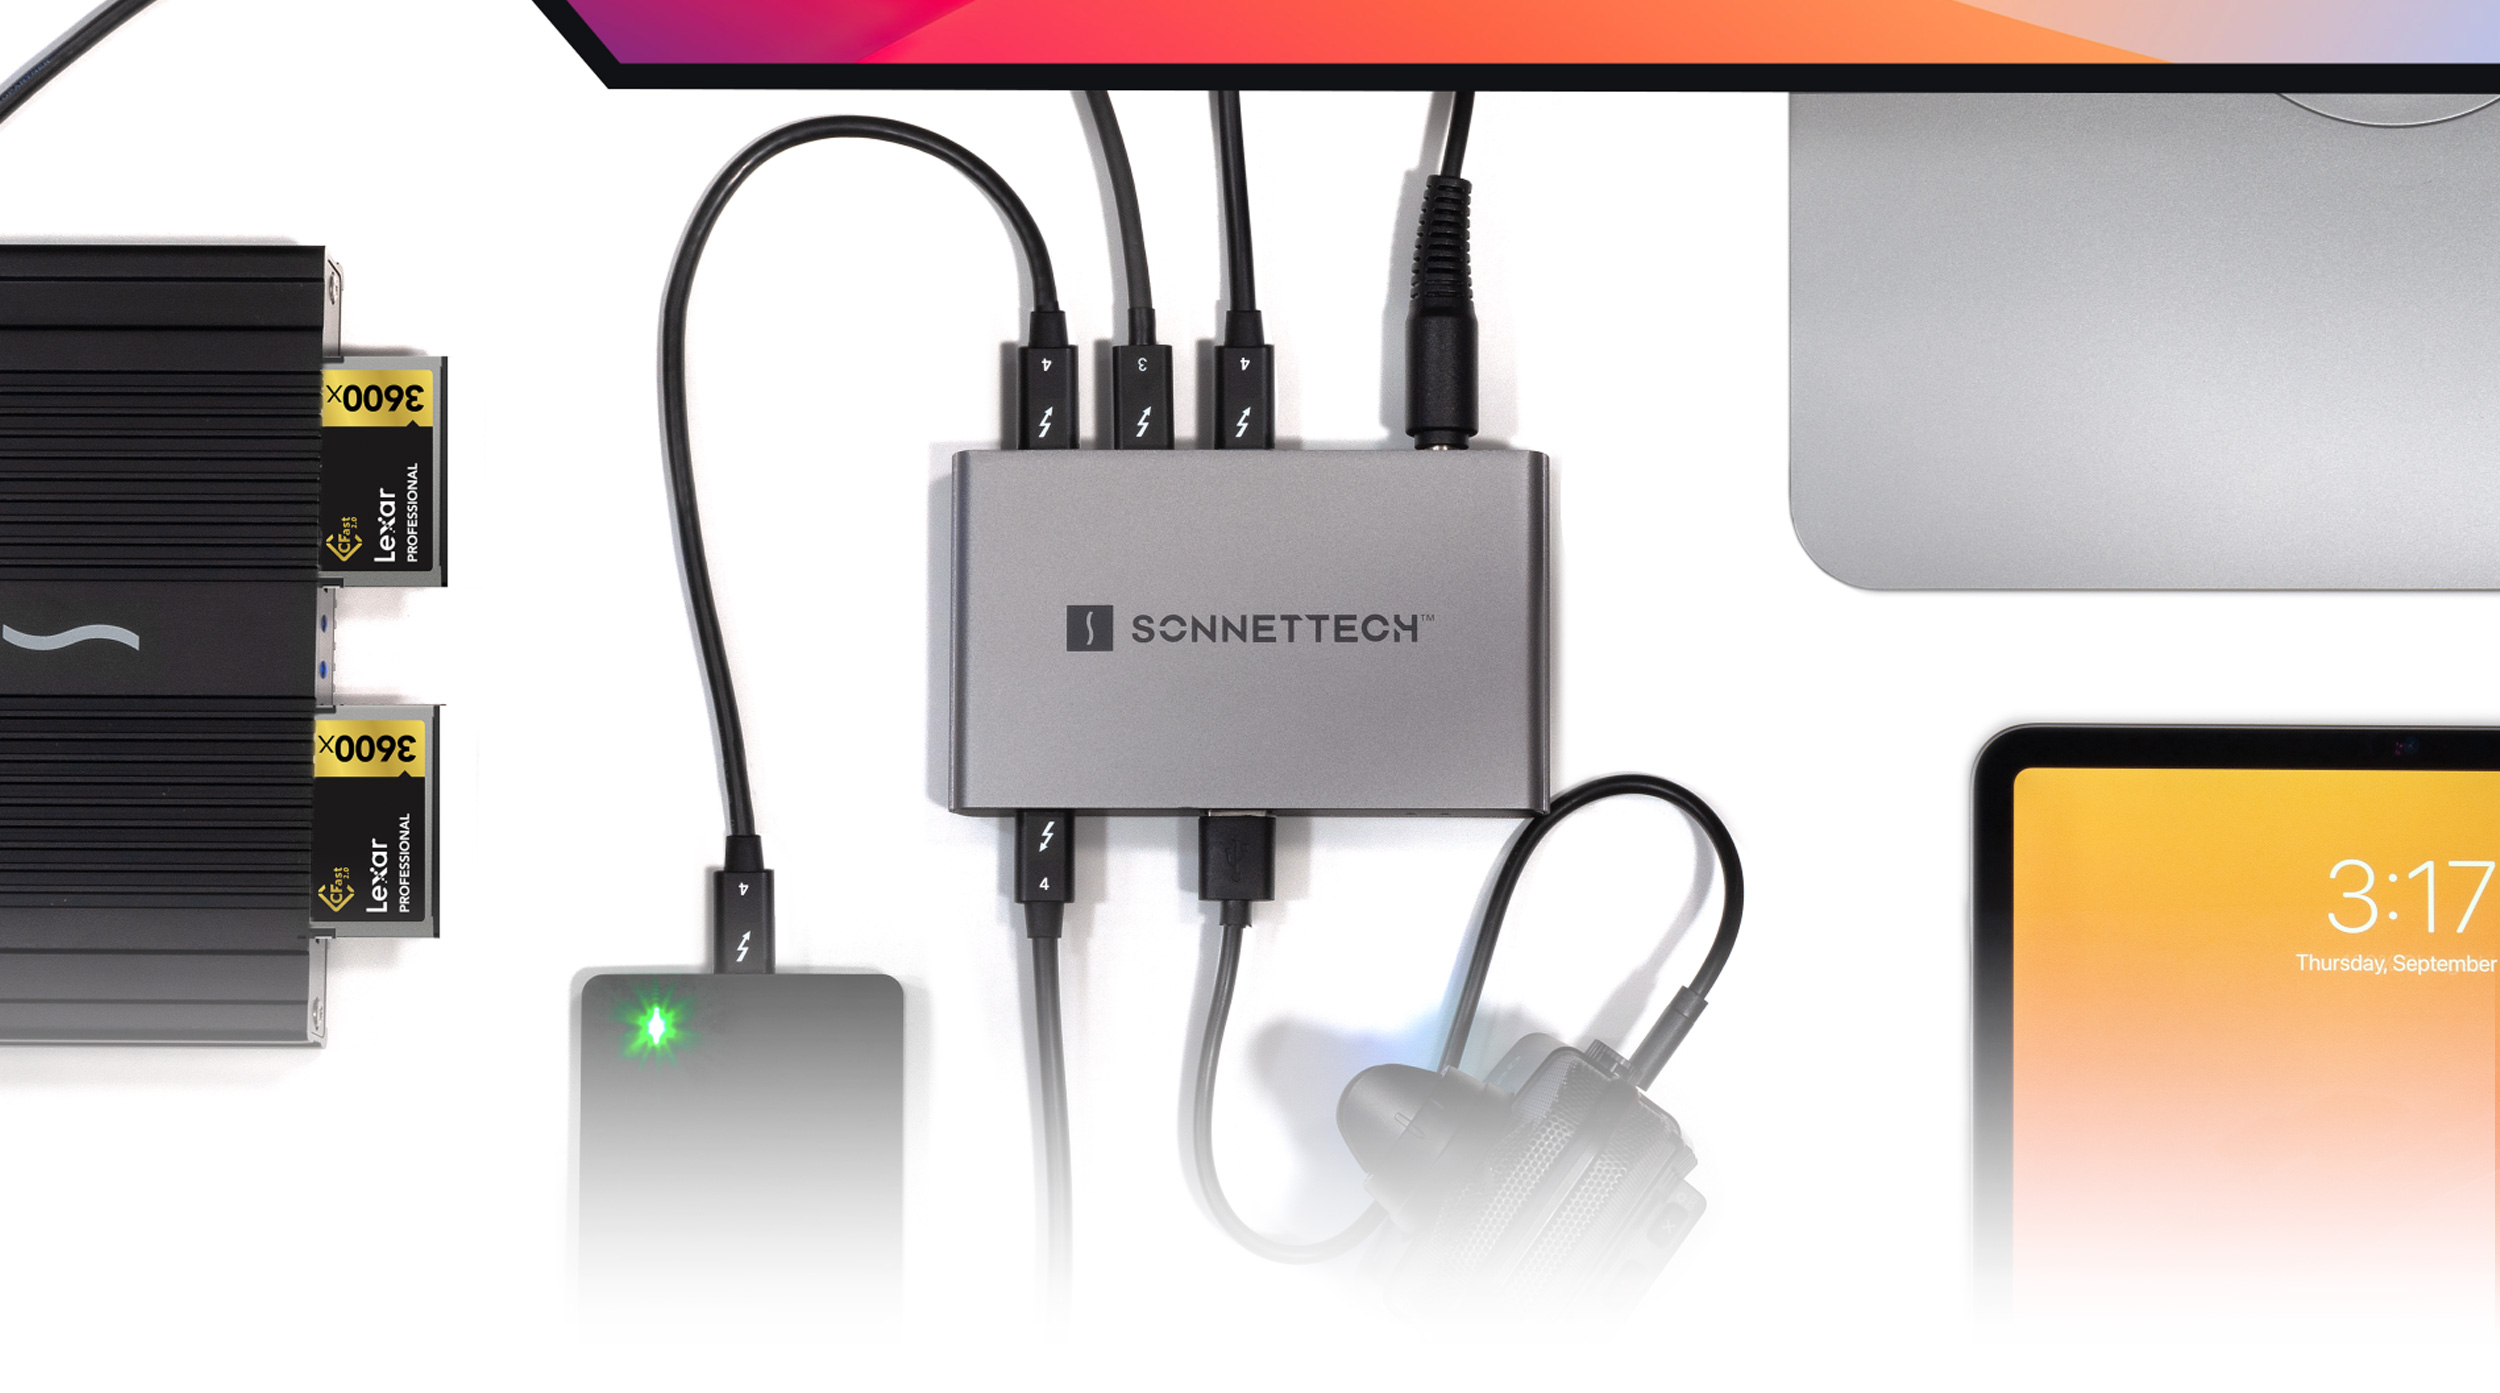 DisplayLink Dual HDMI Adapter for M Series Macs – SONNETTECH